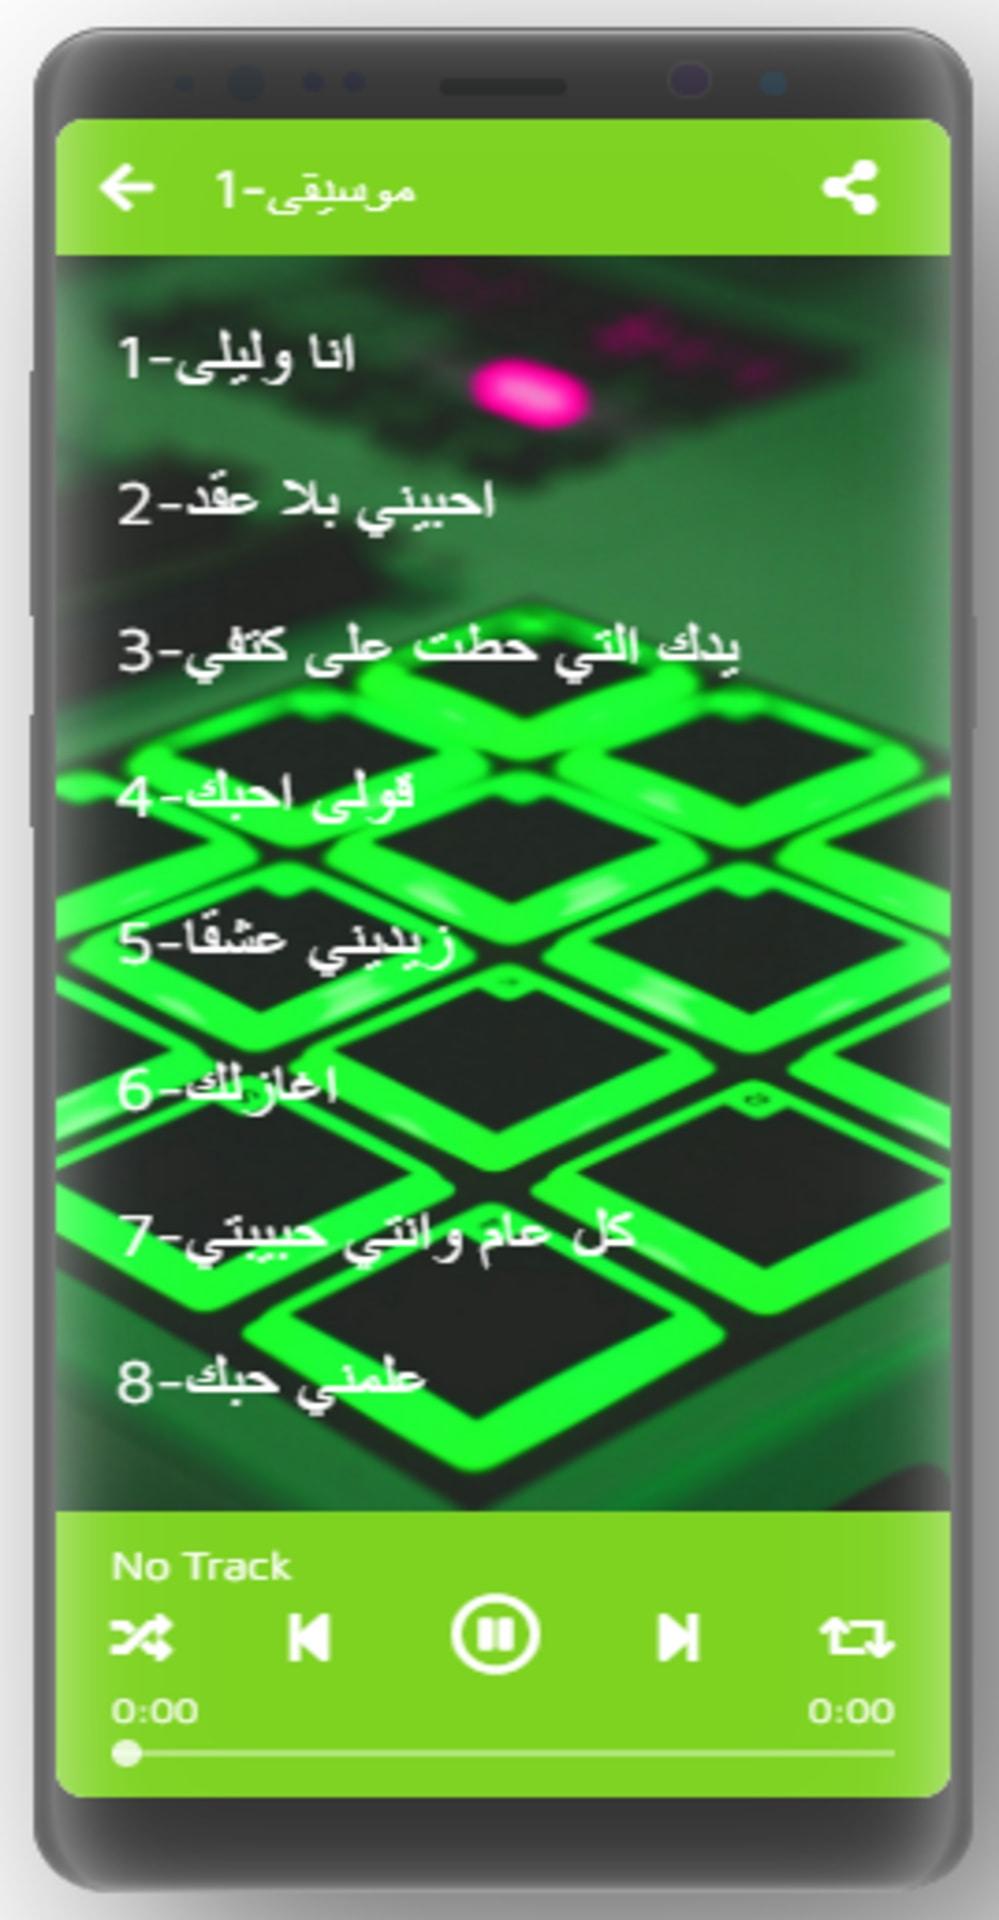 mp3 تحميل اغاني عربية مجانا for Android - APK Download